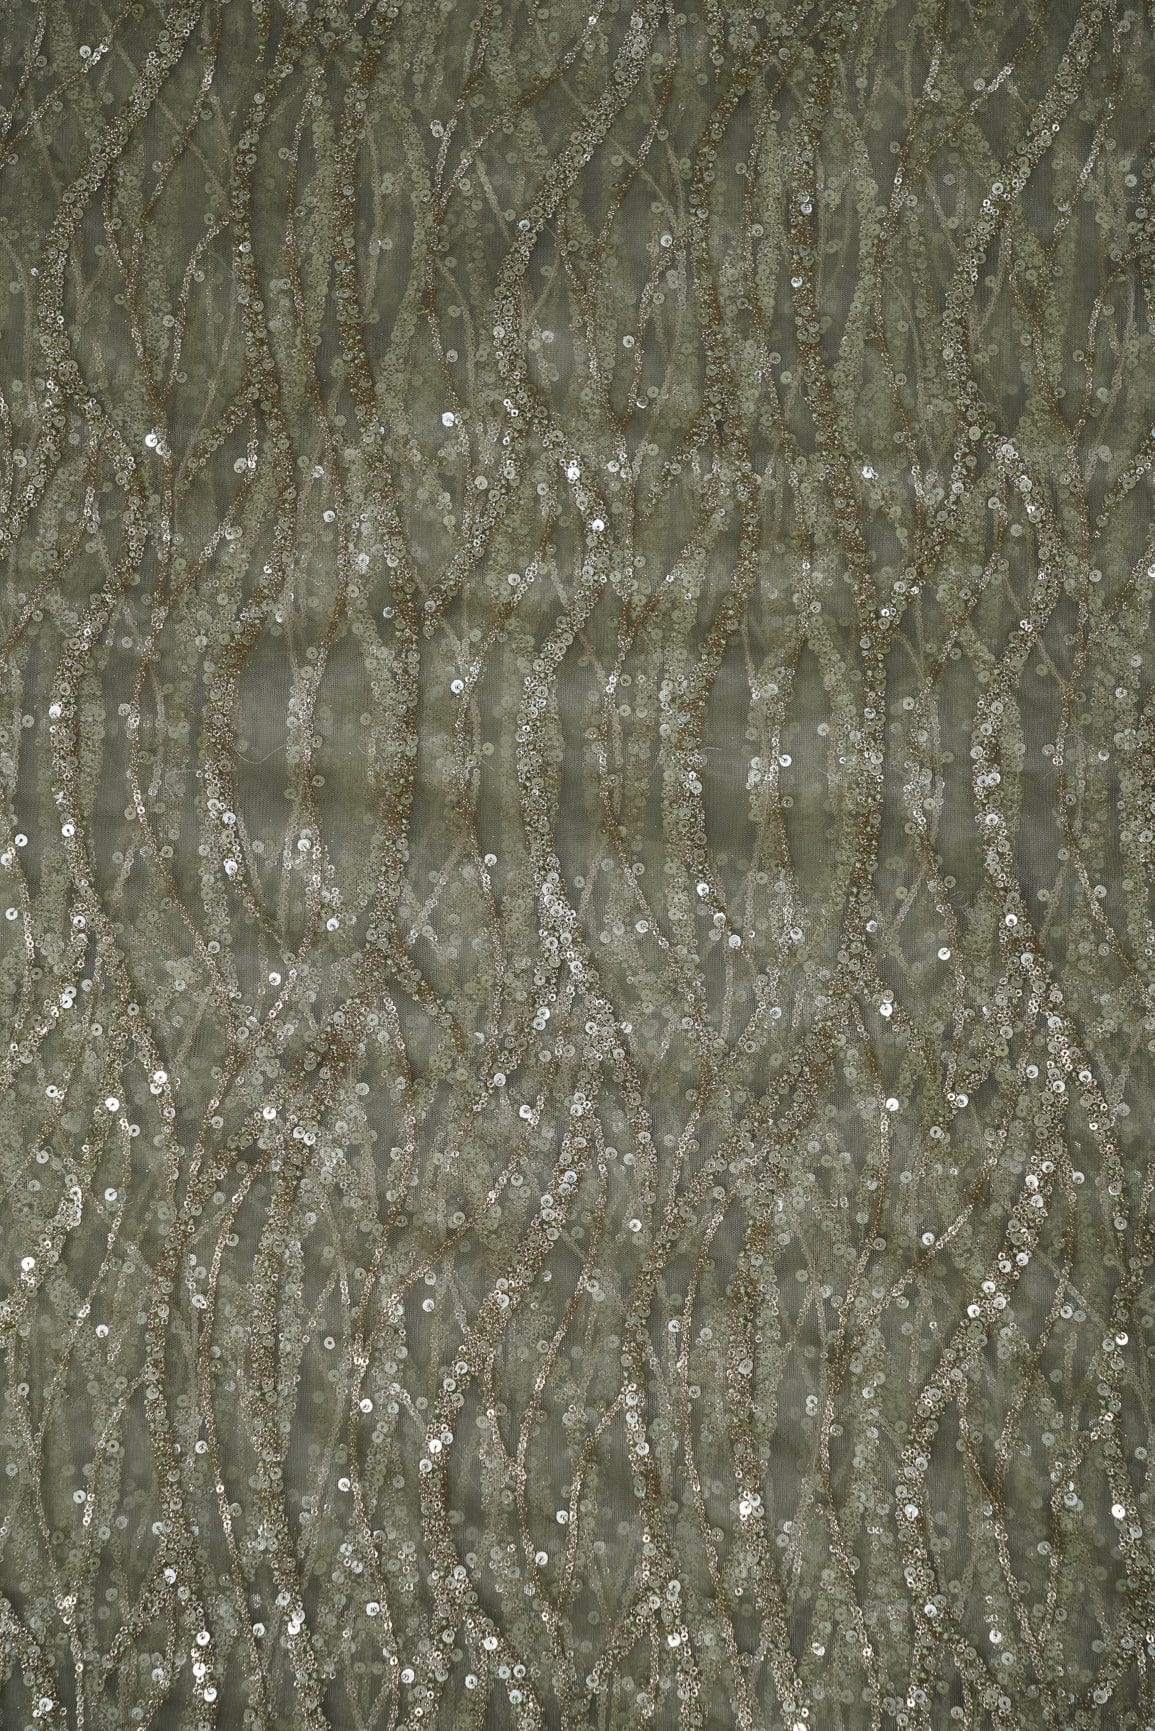 doeraa Embroidery Fabrics 3 Meter Cut Piece Gold Sequins With Olive Thread Embroidery On Olive Soft Net